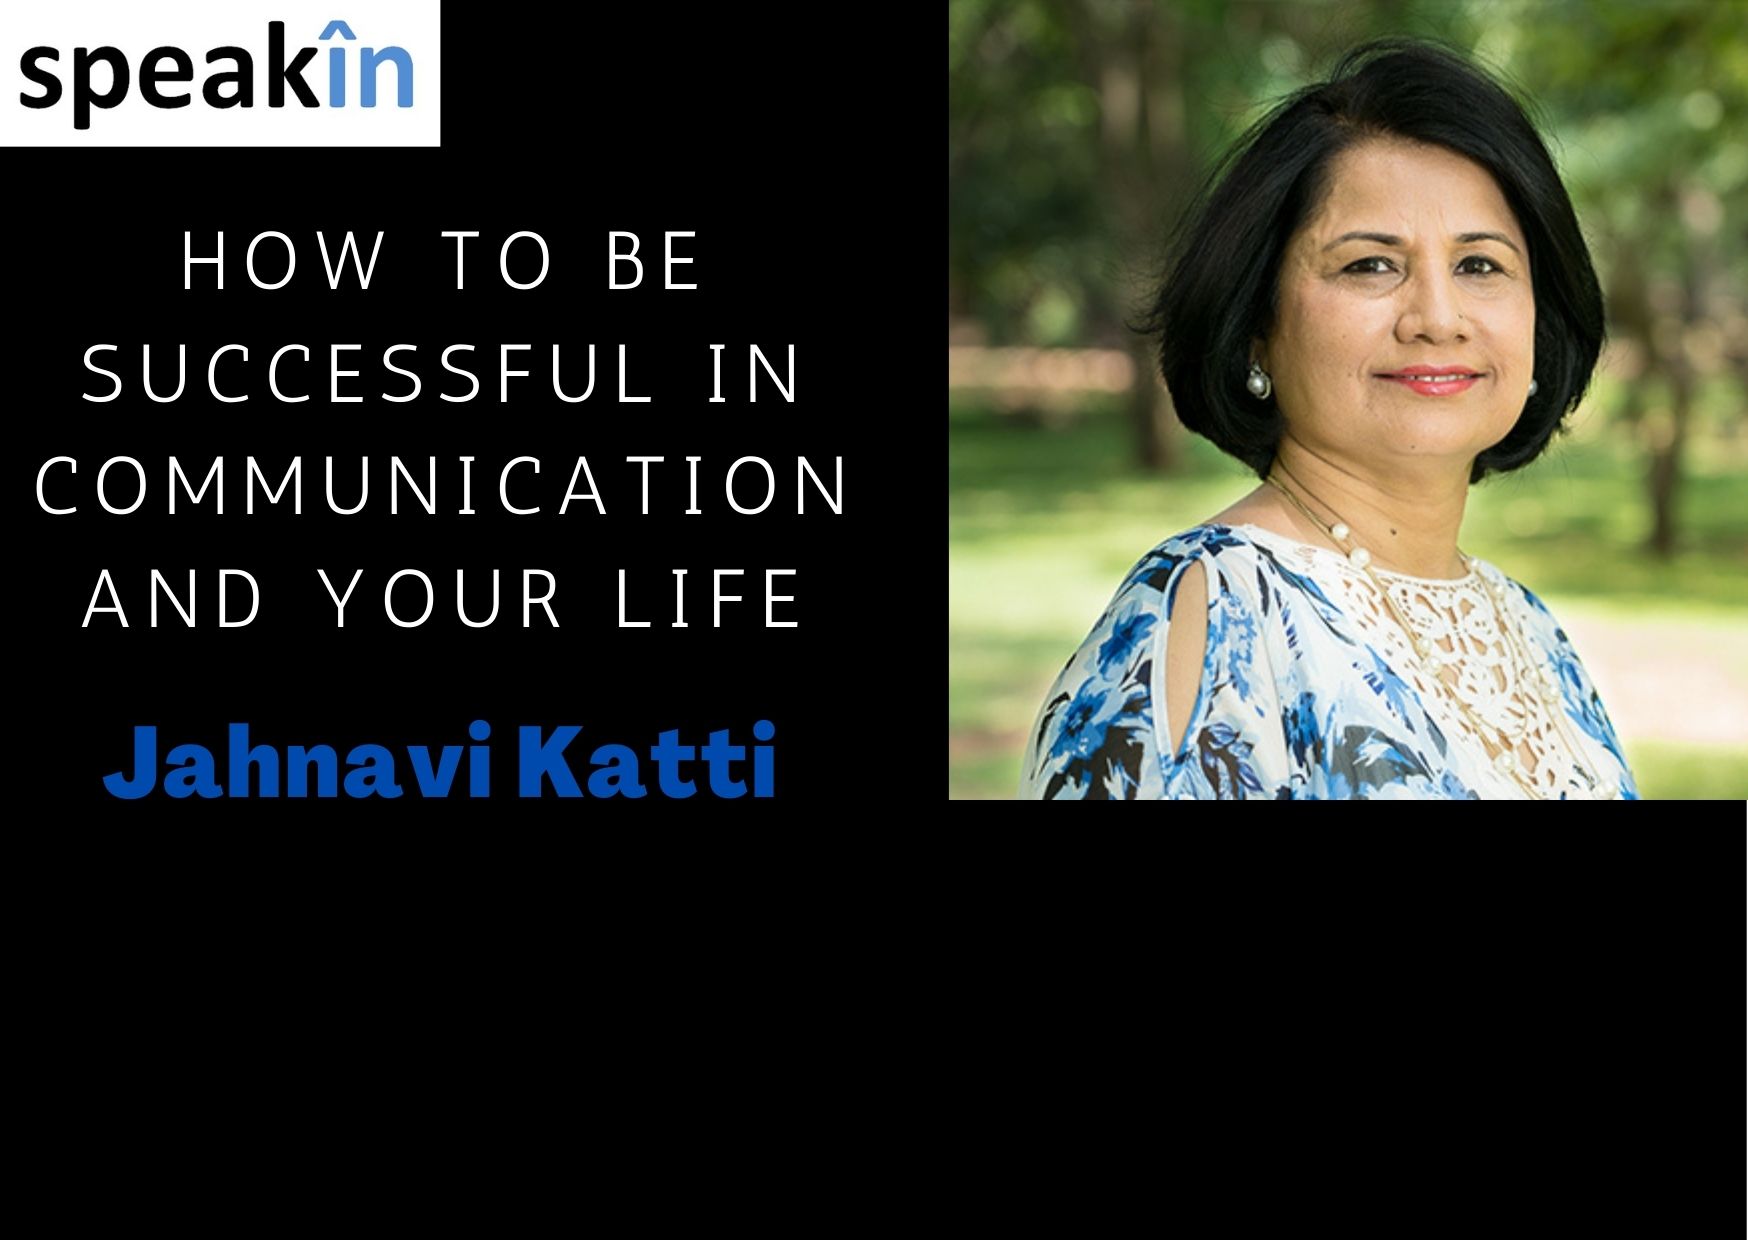 How to be successful in your communications and your life